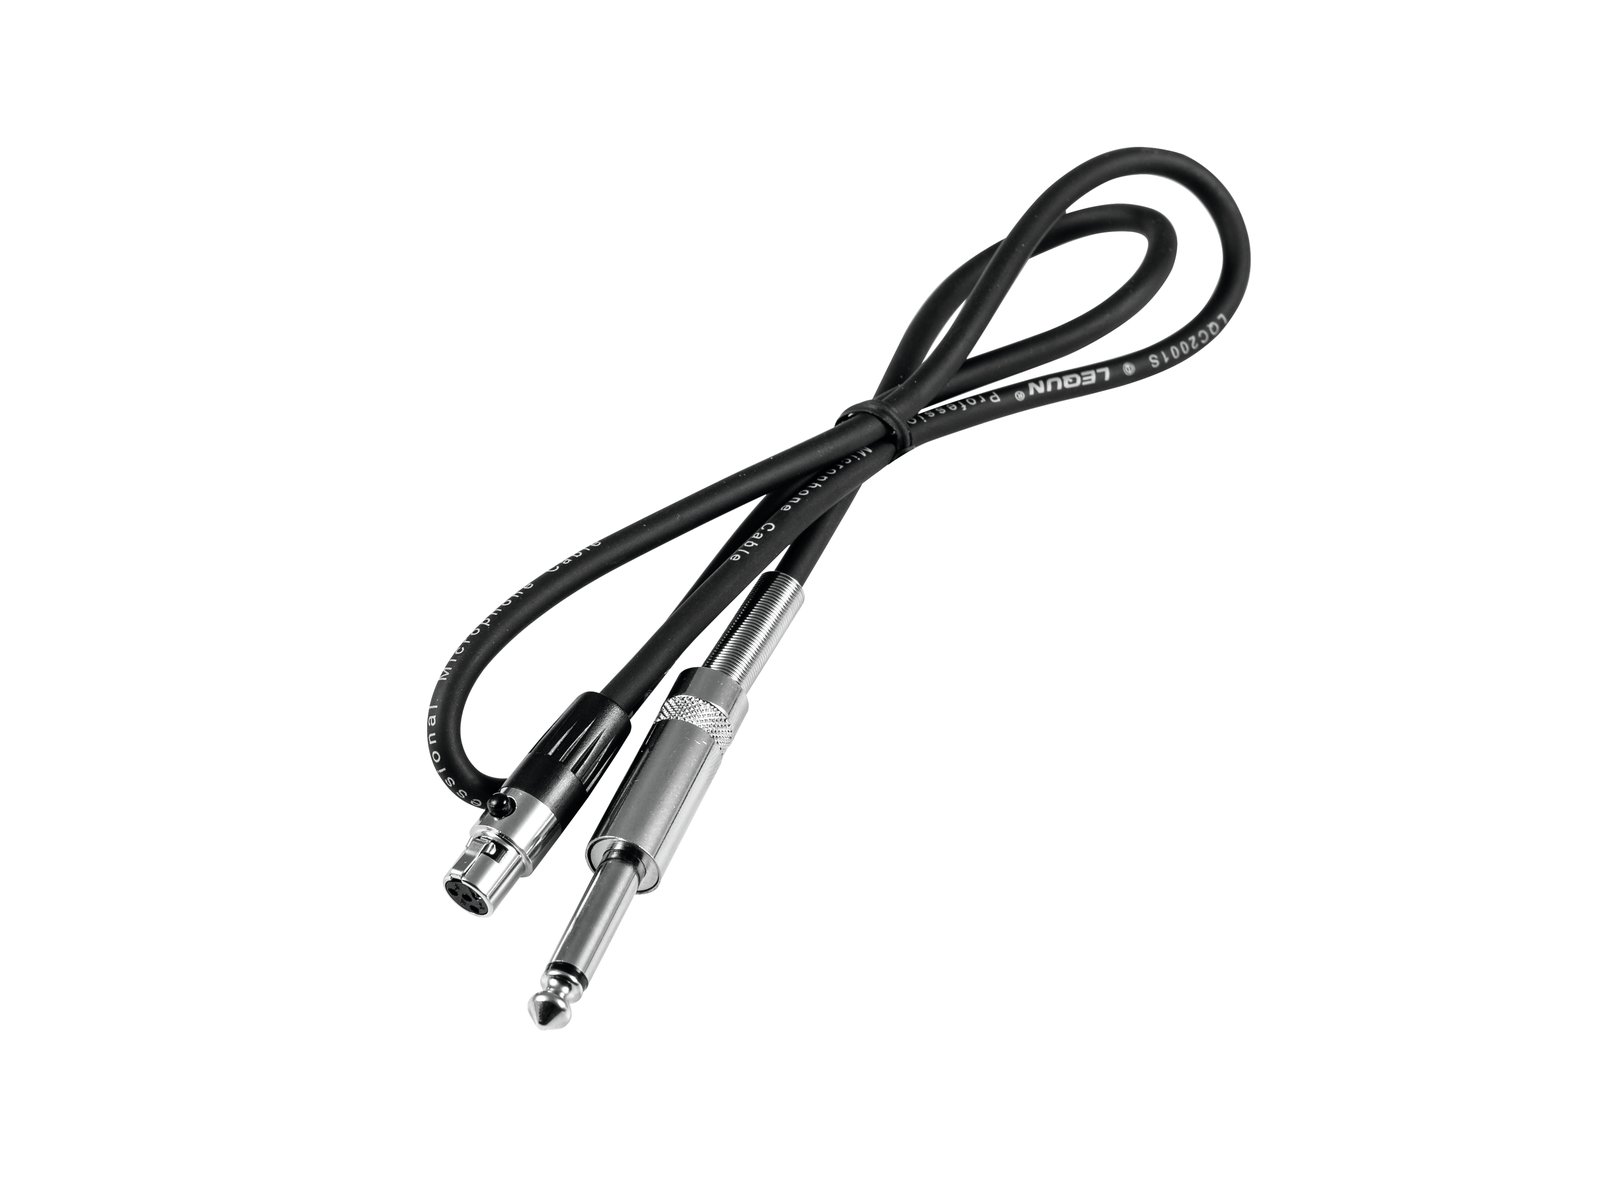 RELACART WGC-1 Adapter Cable